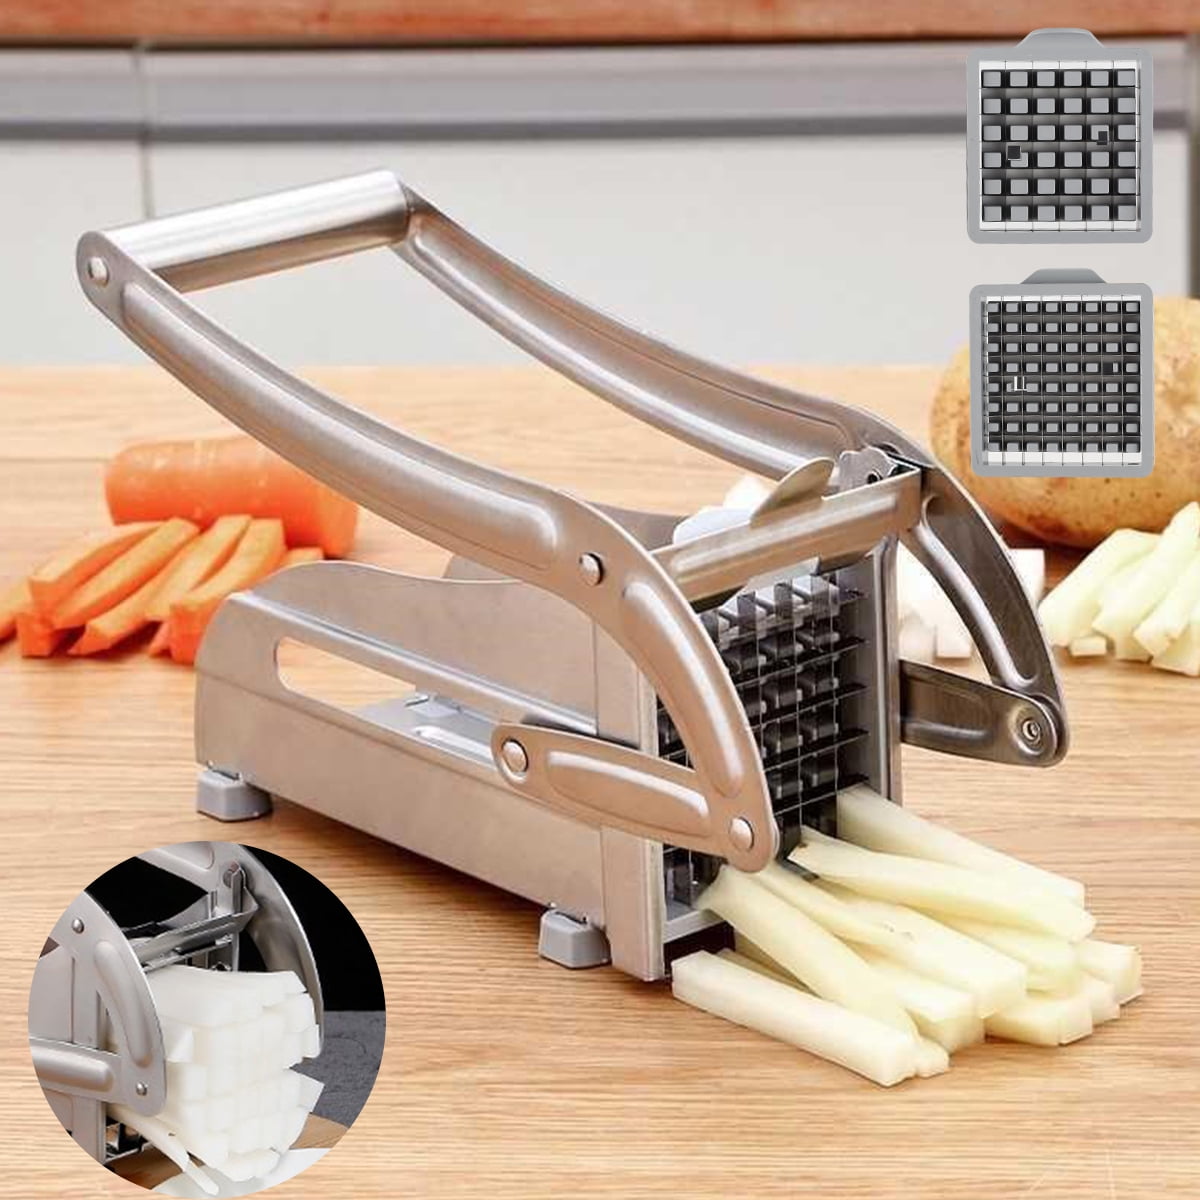 Brand: Multifuncional Type: Manual Vegetable Chopper Specs: 5 Blades,  Kitchen Gadget Keywords: Fruit Vegetable Tools, Potato Radish Cutter,  French Fry Slicer Key Points: Efficient Cutting, Easy To Clean Main  Features: 5 Interchangeable